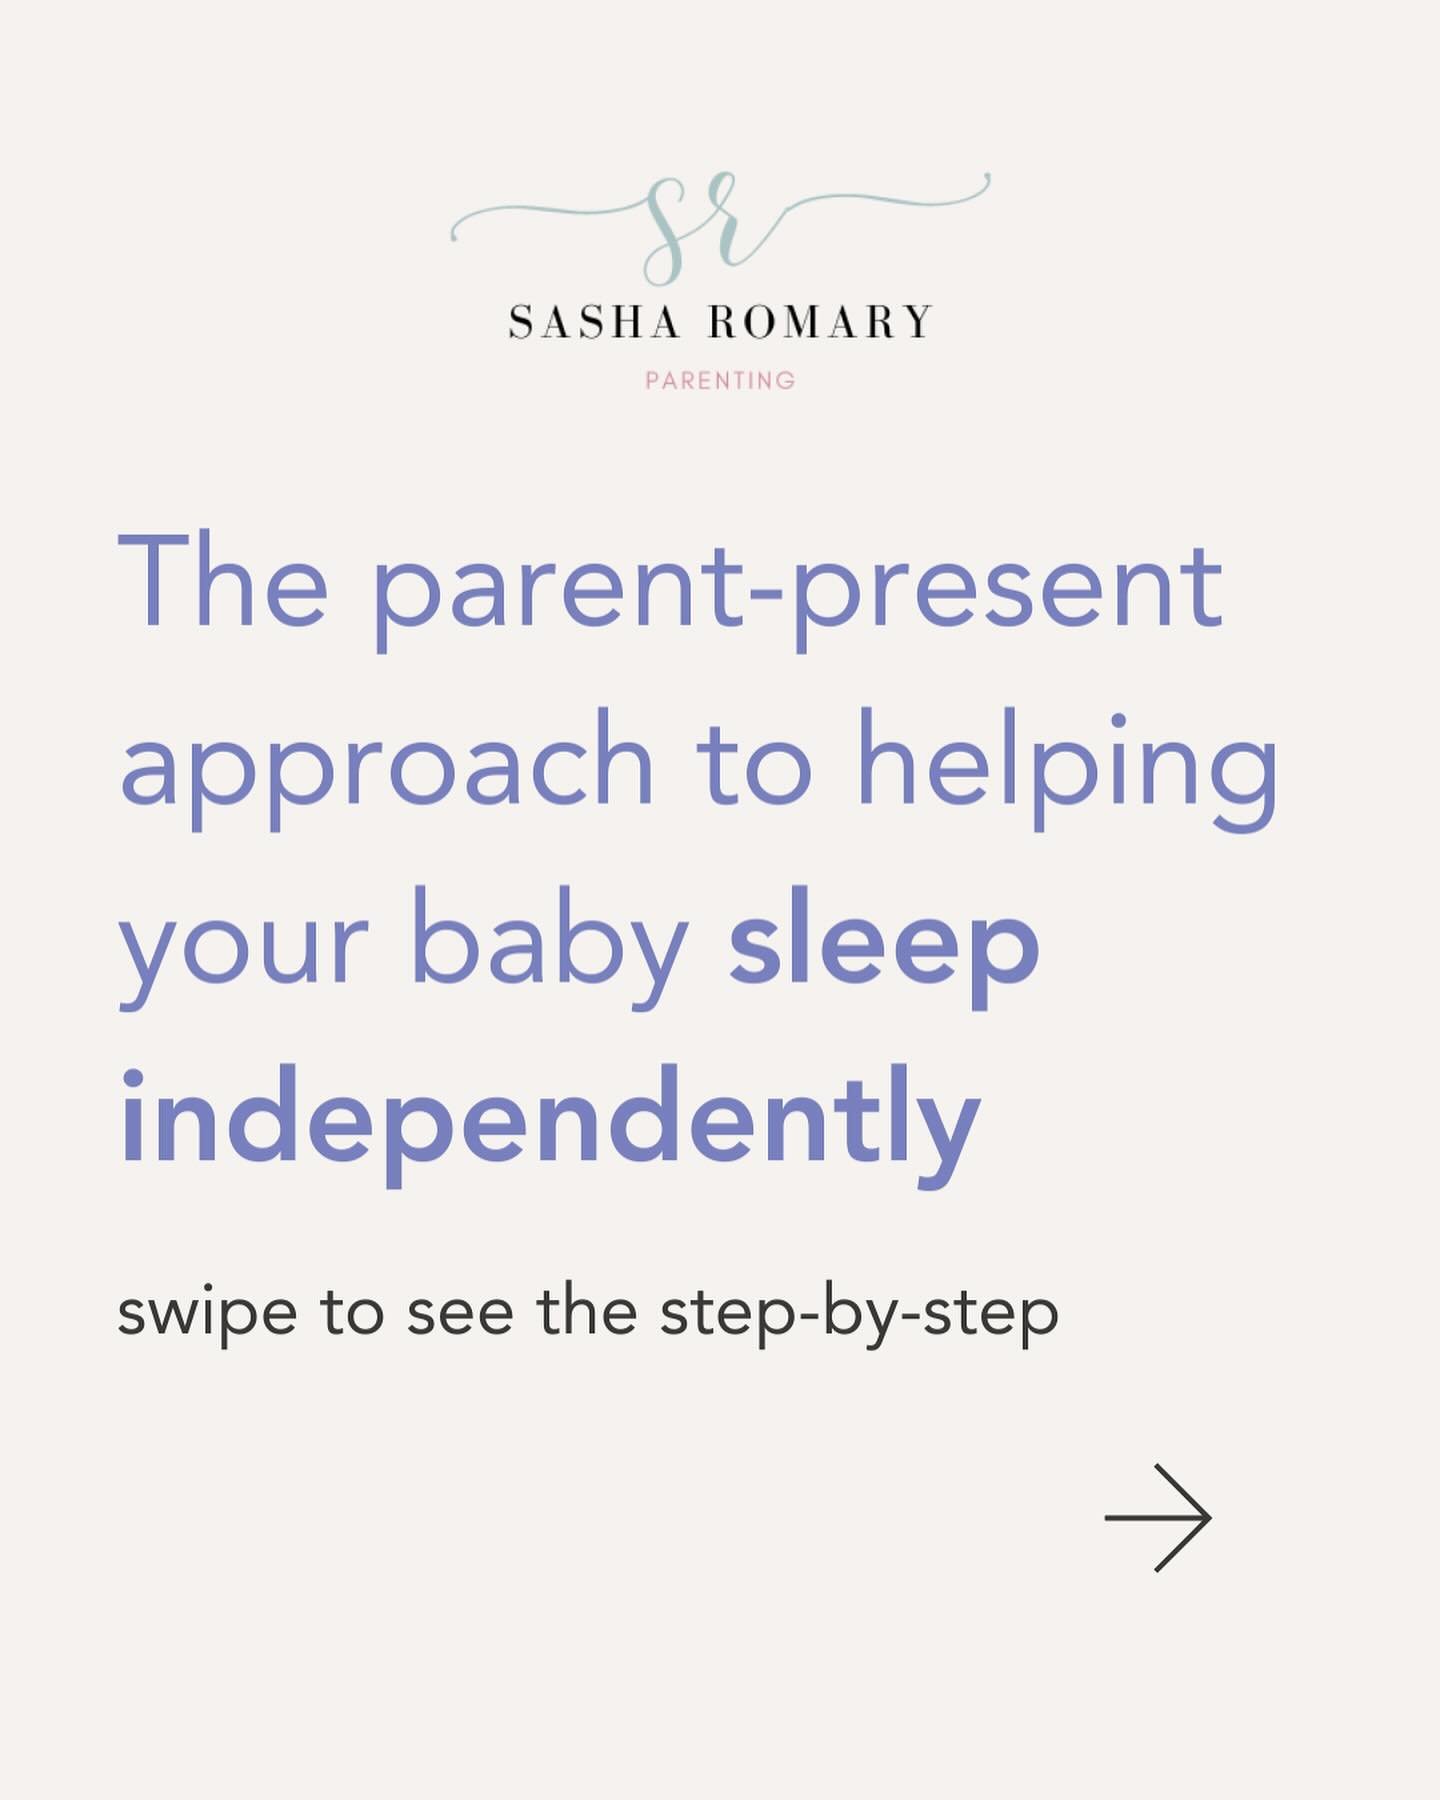 Nope! Sleep training does not equate CIO 🙅🏼&zwj;♀️

If you are ready to offer a parent-present approach to helping your baby sleep independently, raise your hand below! 

Get more sleep without CIO! 

#sleeptraining #responsiveparenting #nocio #gen